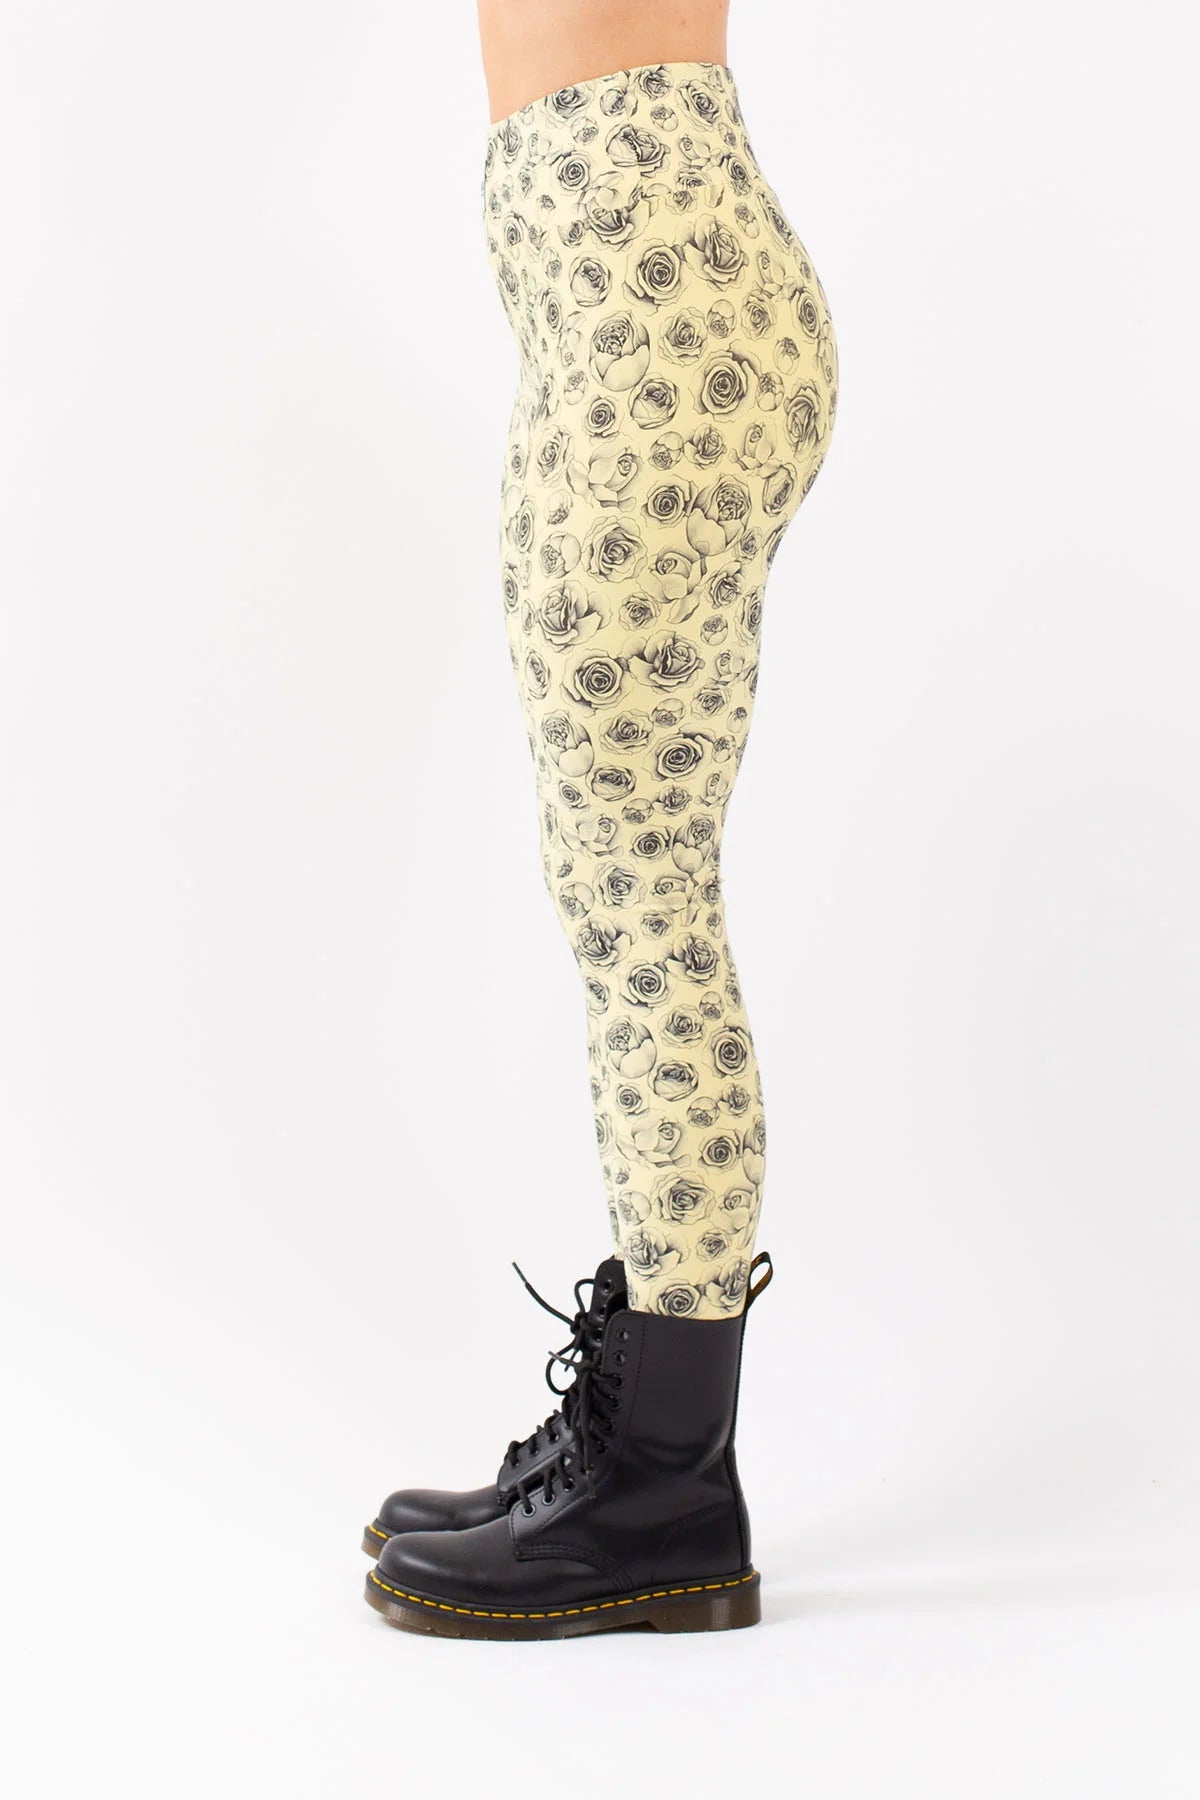 sous-vetement-legging-icecold-tights-yellow-eivy-A00295109-DM2-SHOP-05